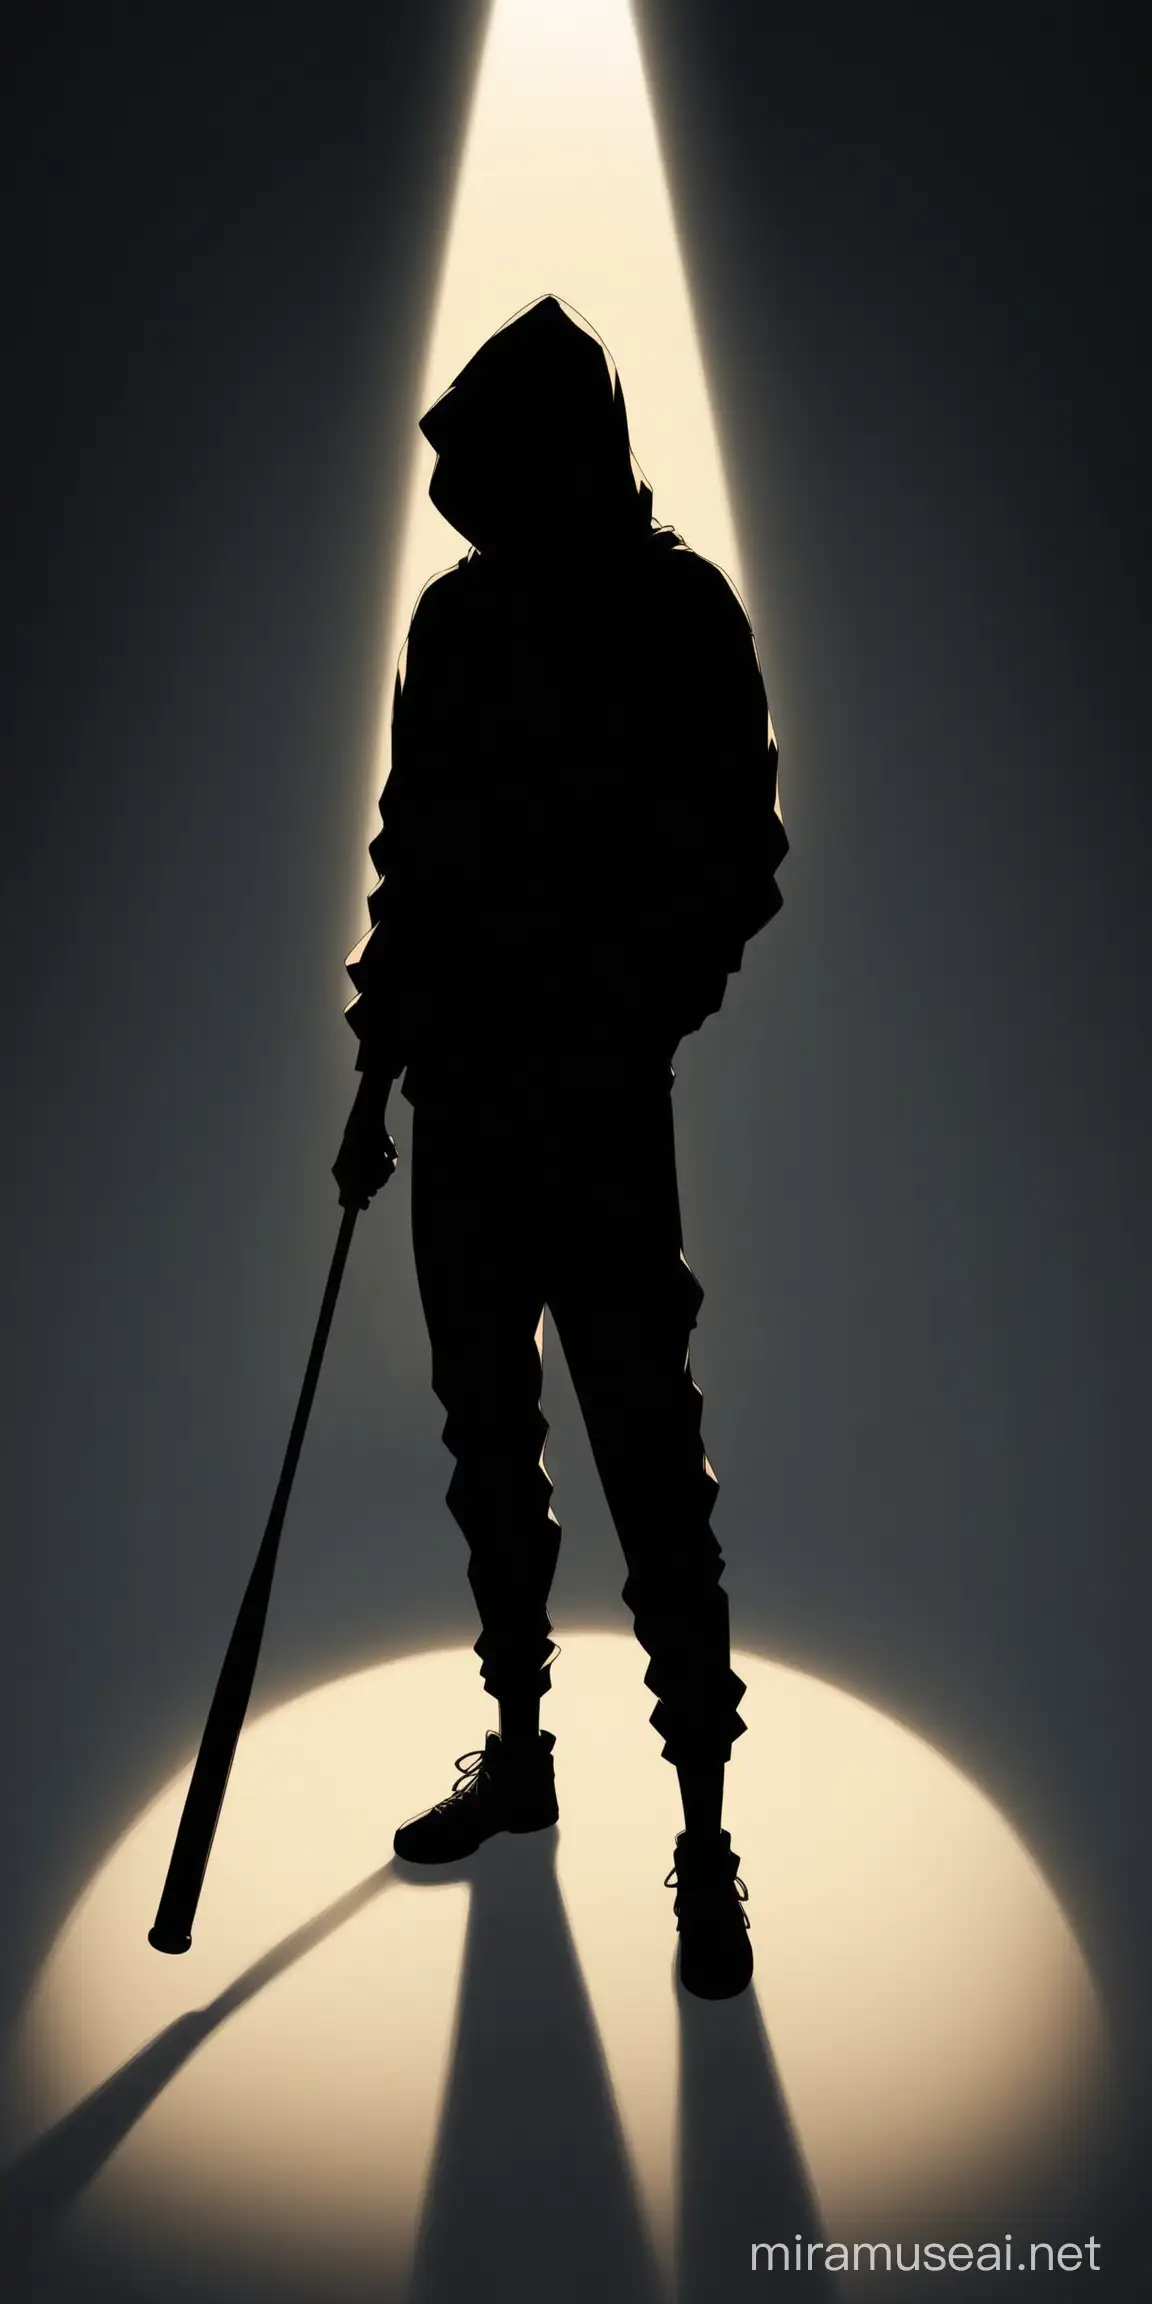 An image of full body shadow of an anime male character wearing hoodie and holding baseball bat